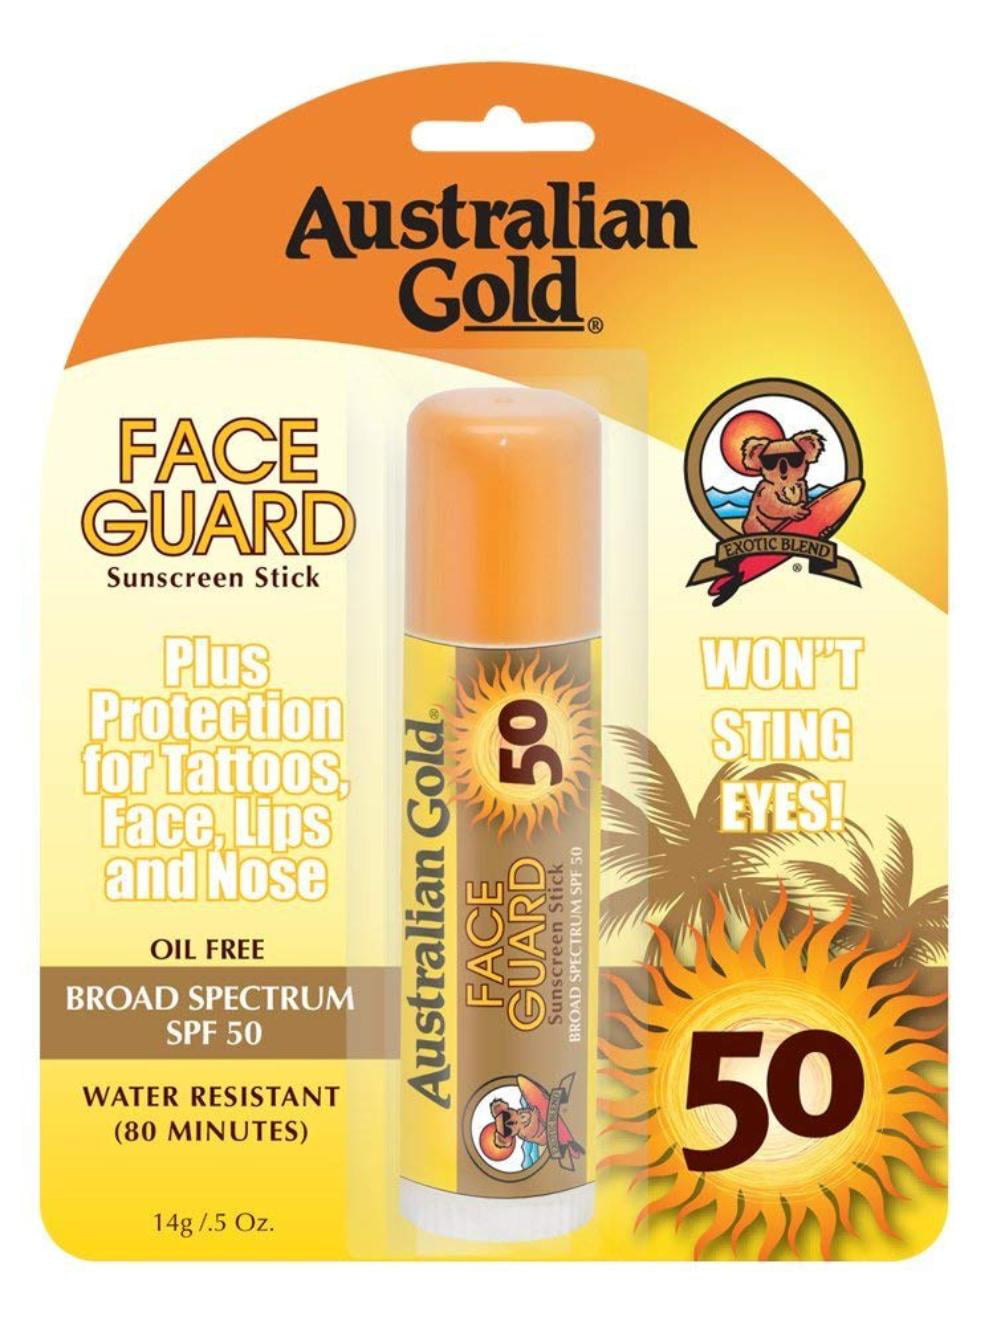 Face Guard Sunscreen Stick, For Use on Face, Lips, & Won't Sting Eyes, Broad Spectrum, Water Resistant, Free, Paraben Free, PABA.., By Australian Gold,USA - Walmart.com